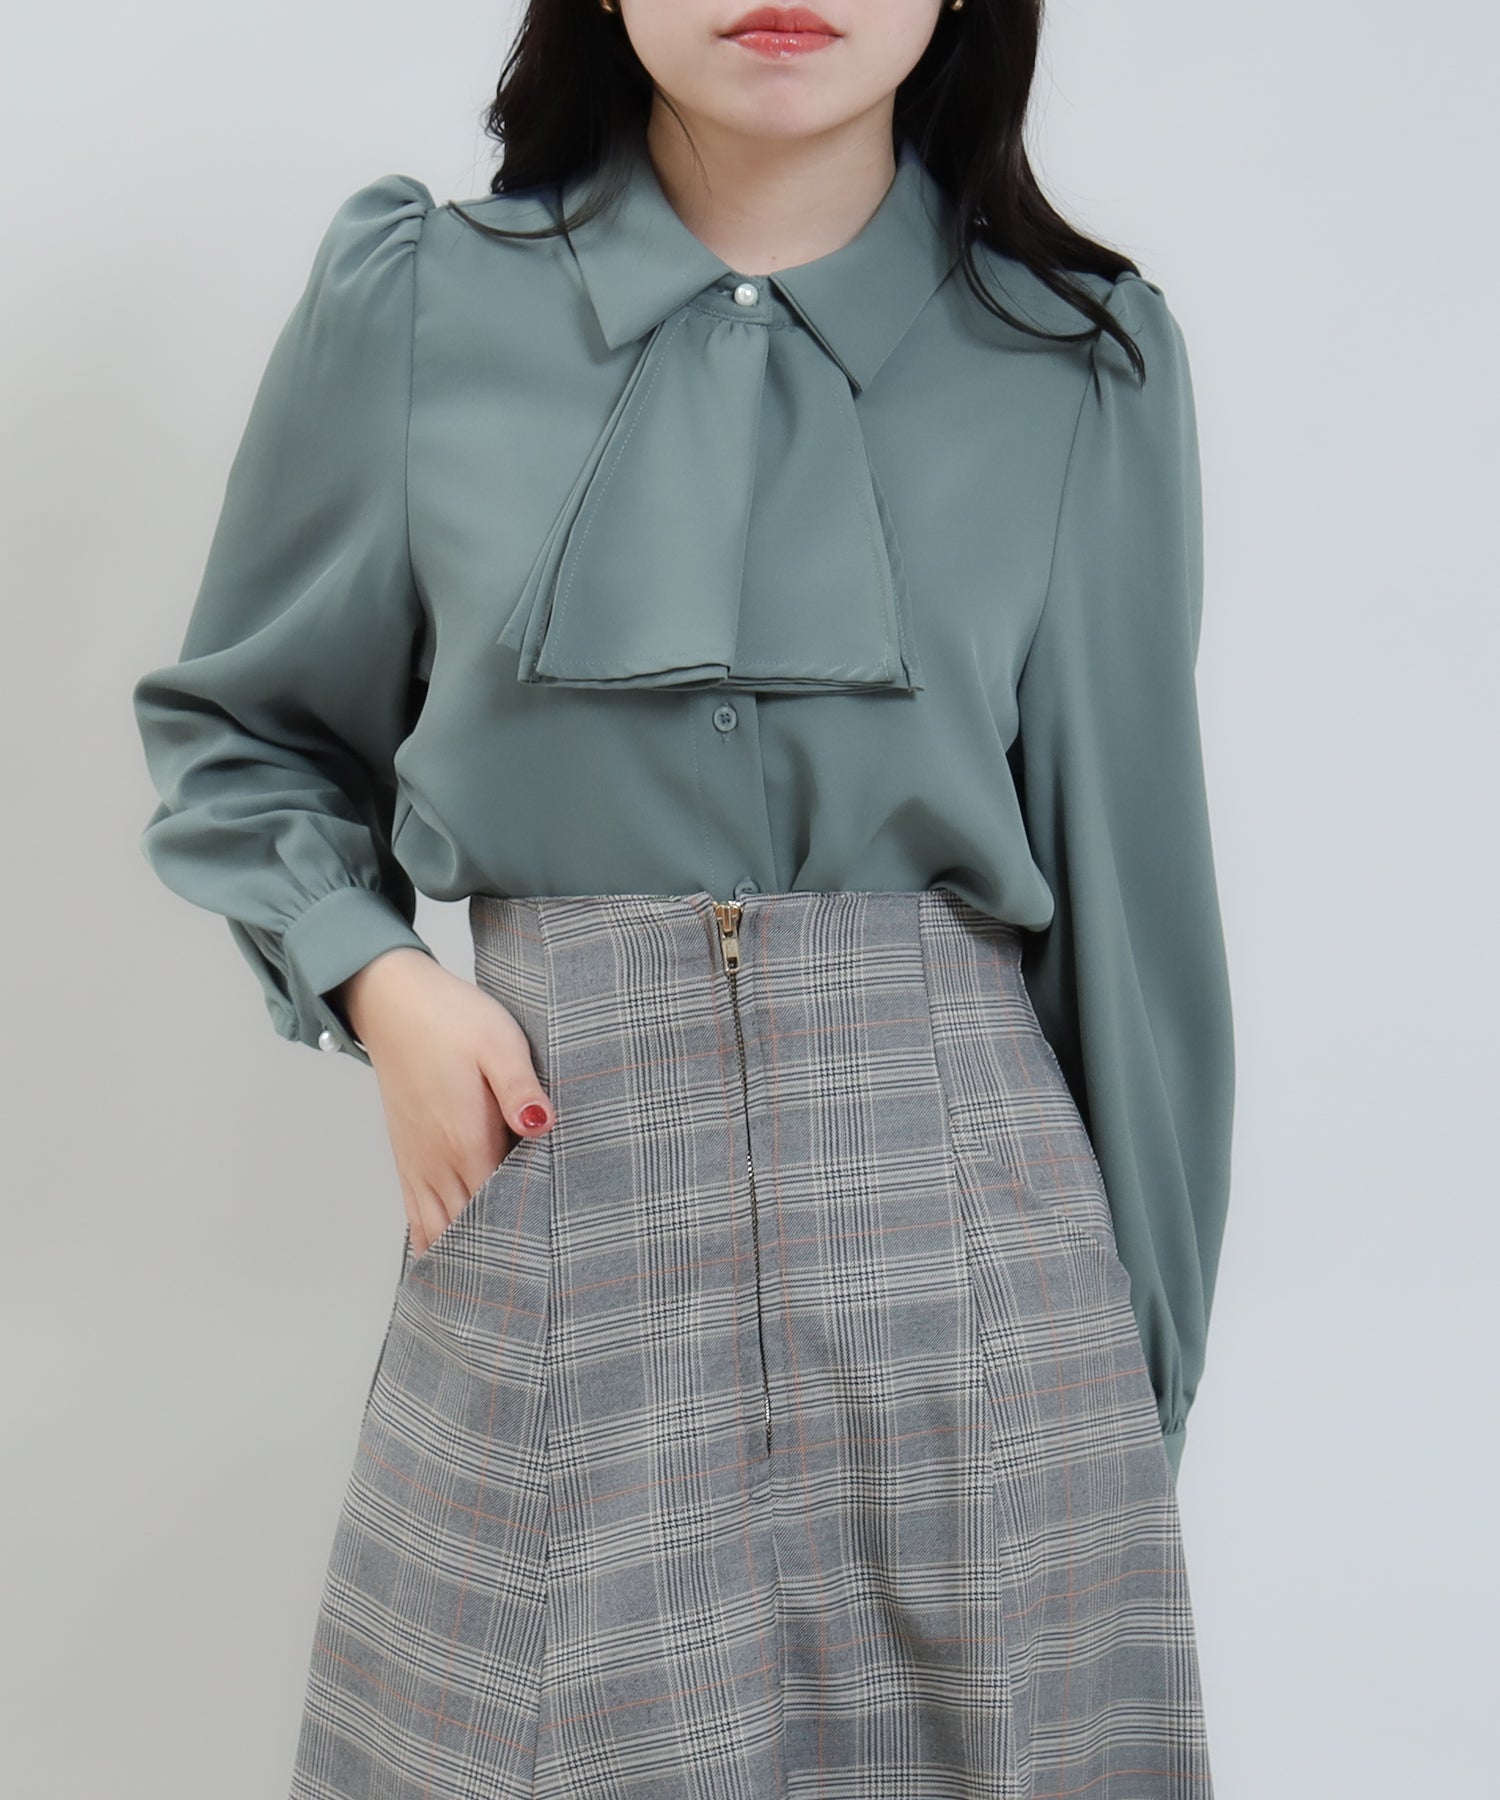 Thick frill bowtie blouse